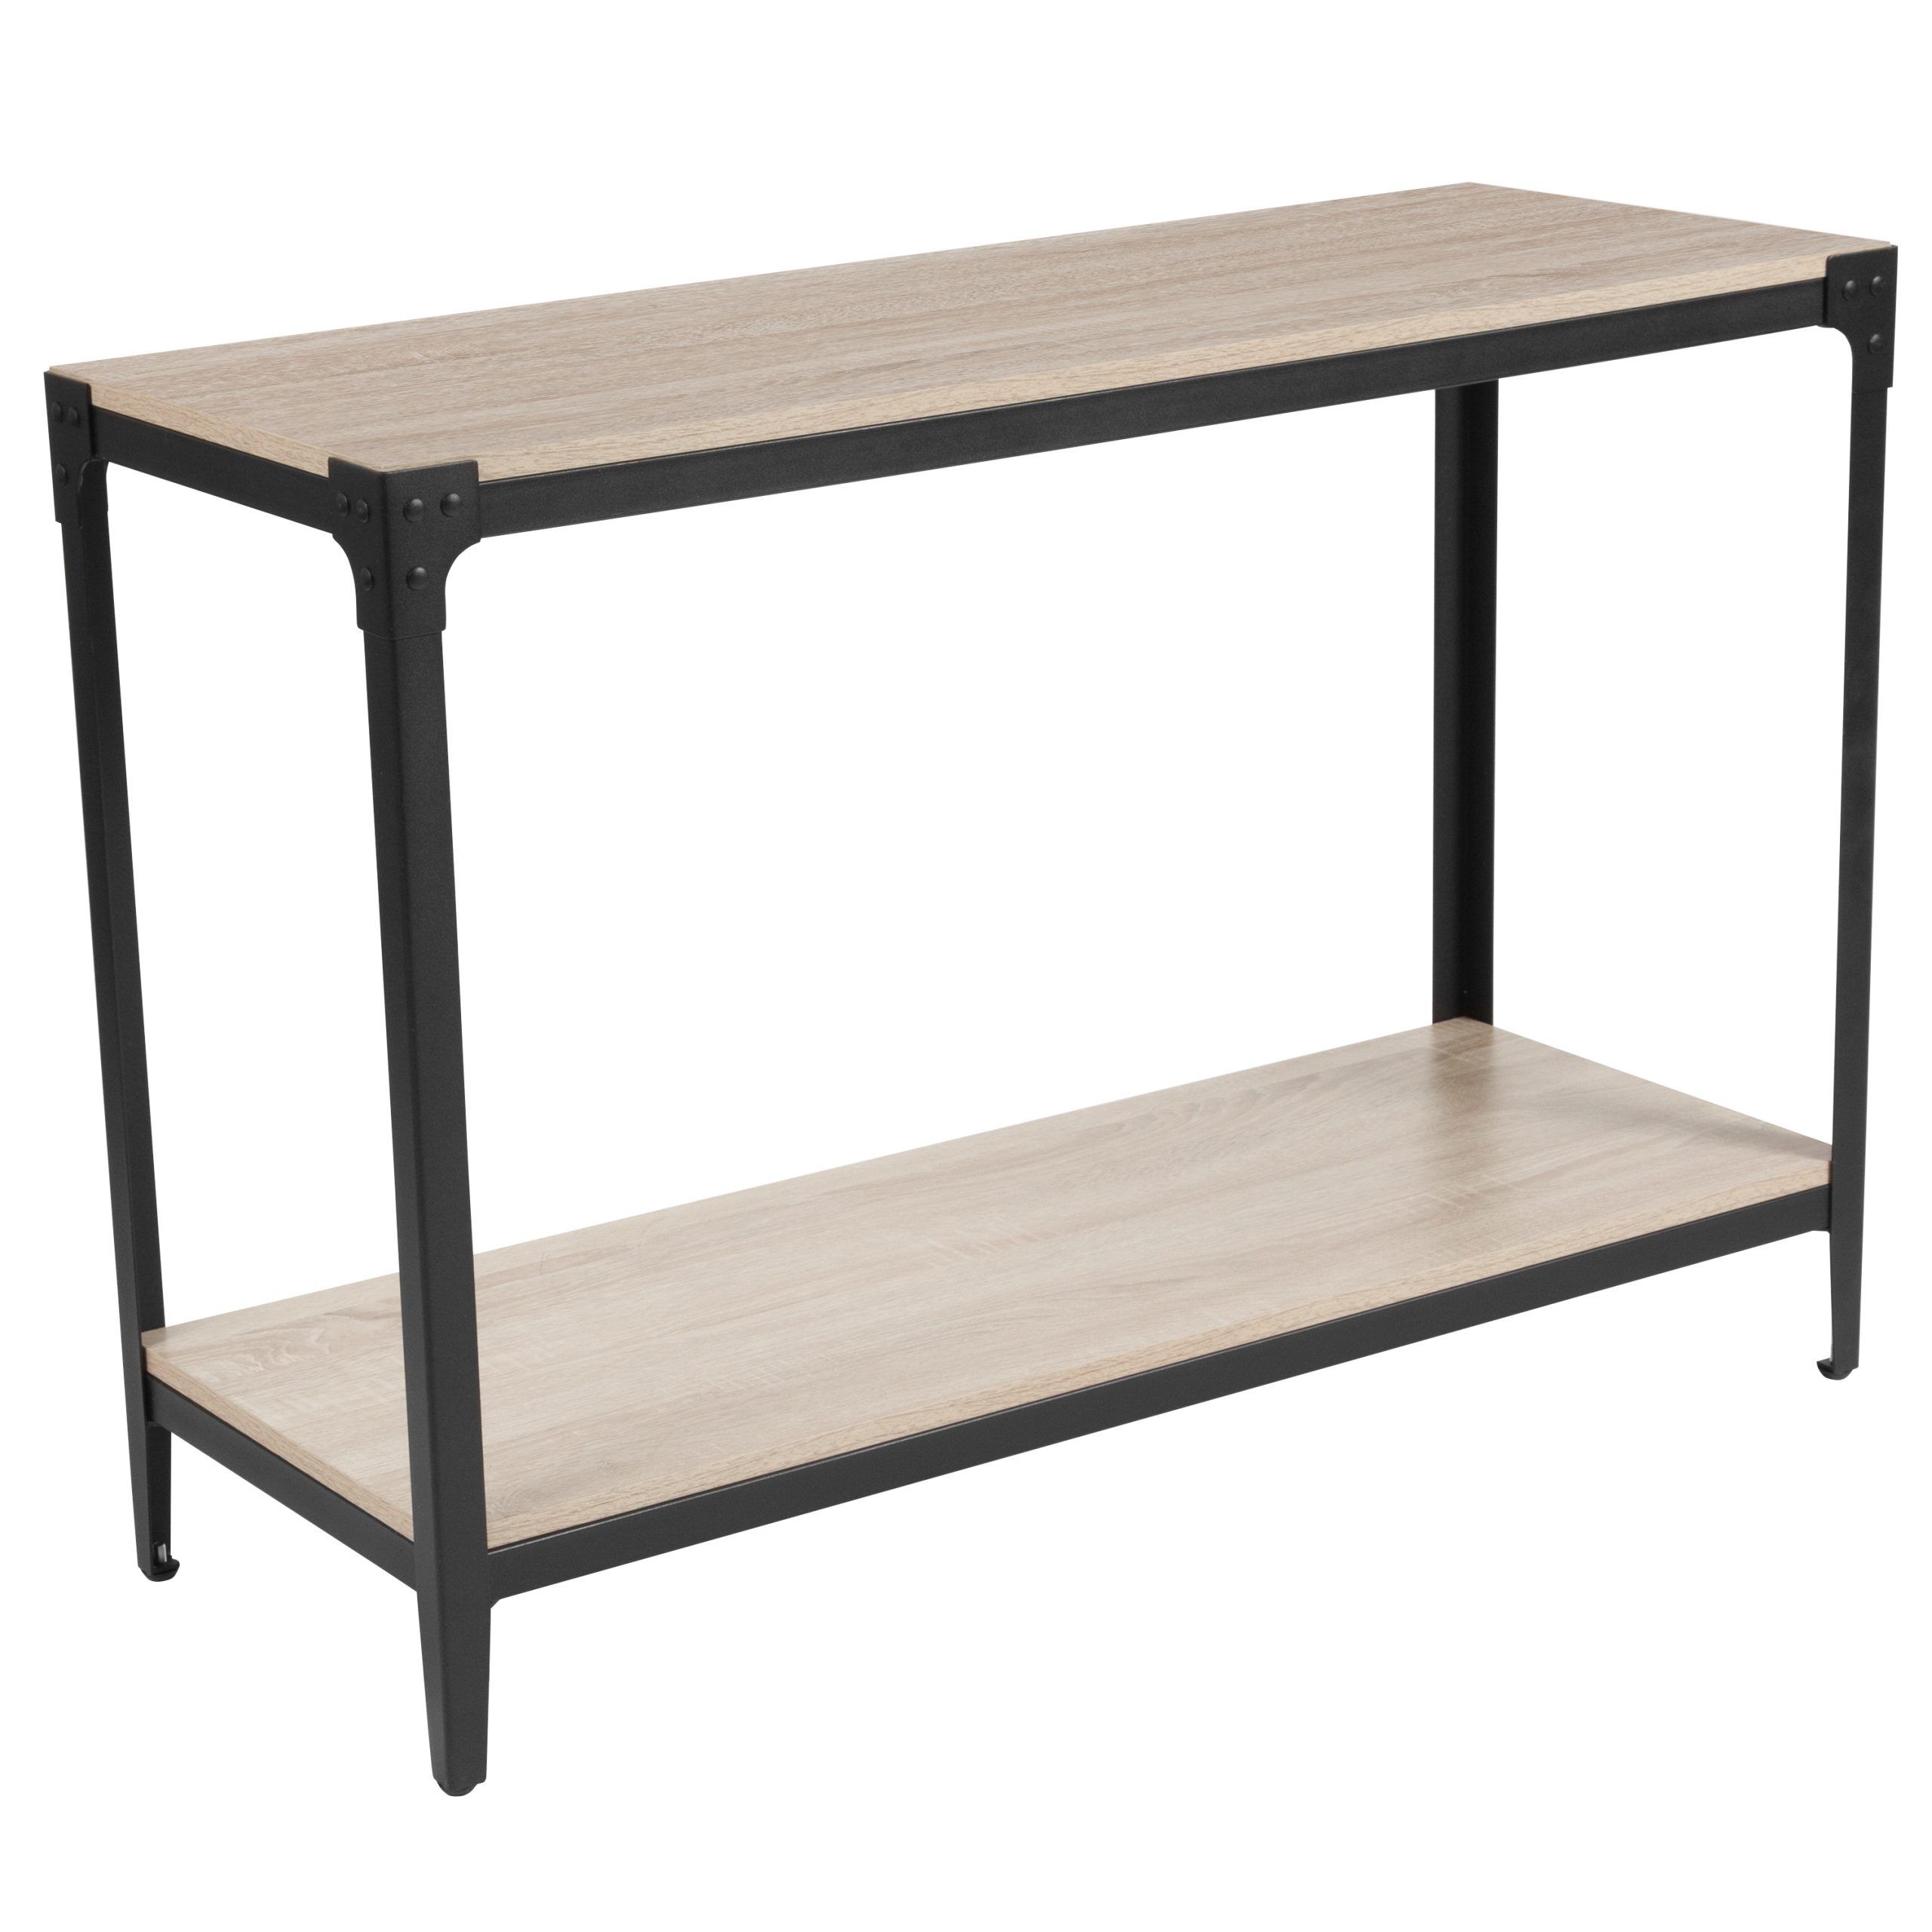 Northvale Collection Console Table With Metal Legs Throughout Metal Console Tables (View 16 of 20)